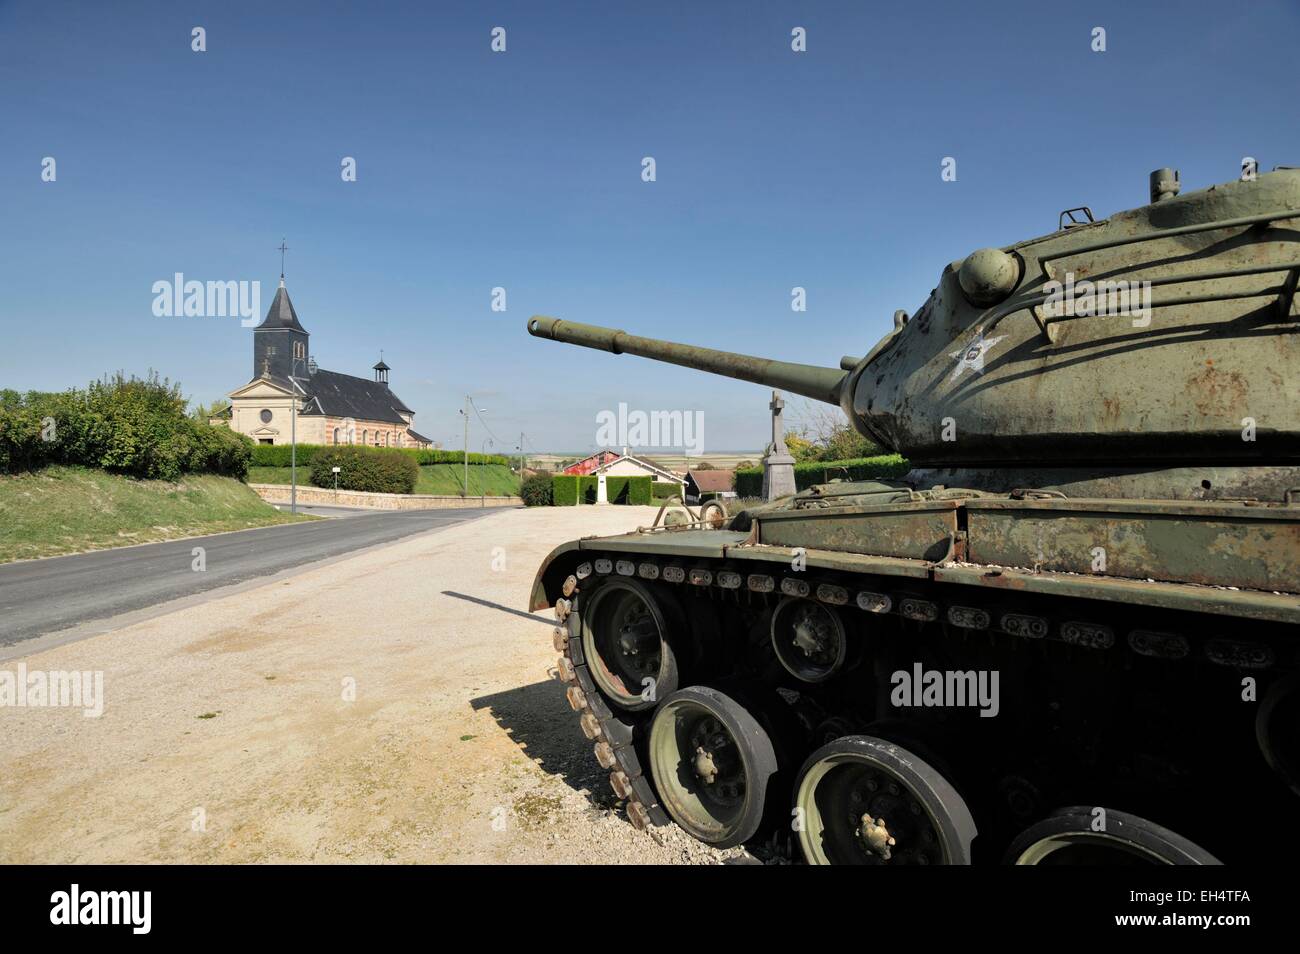 France, Marne, Valmy, US tank M47 Patton at the entrance of the village Stock Photo